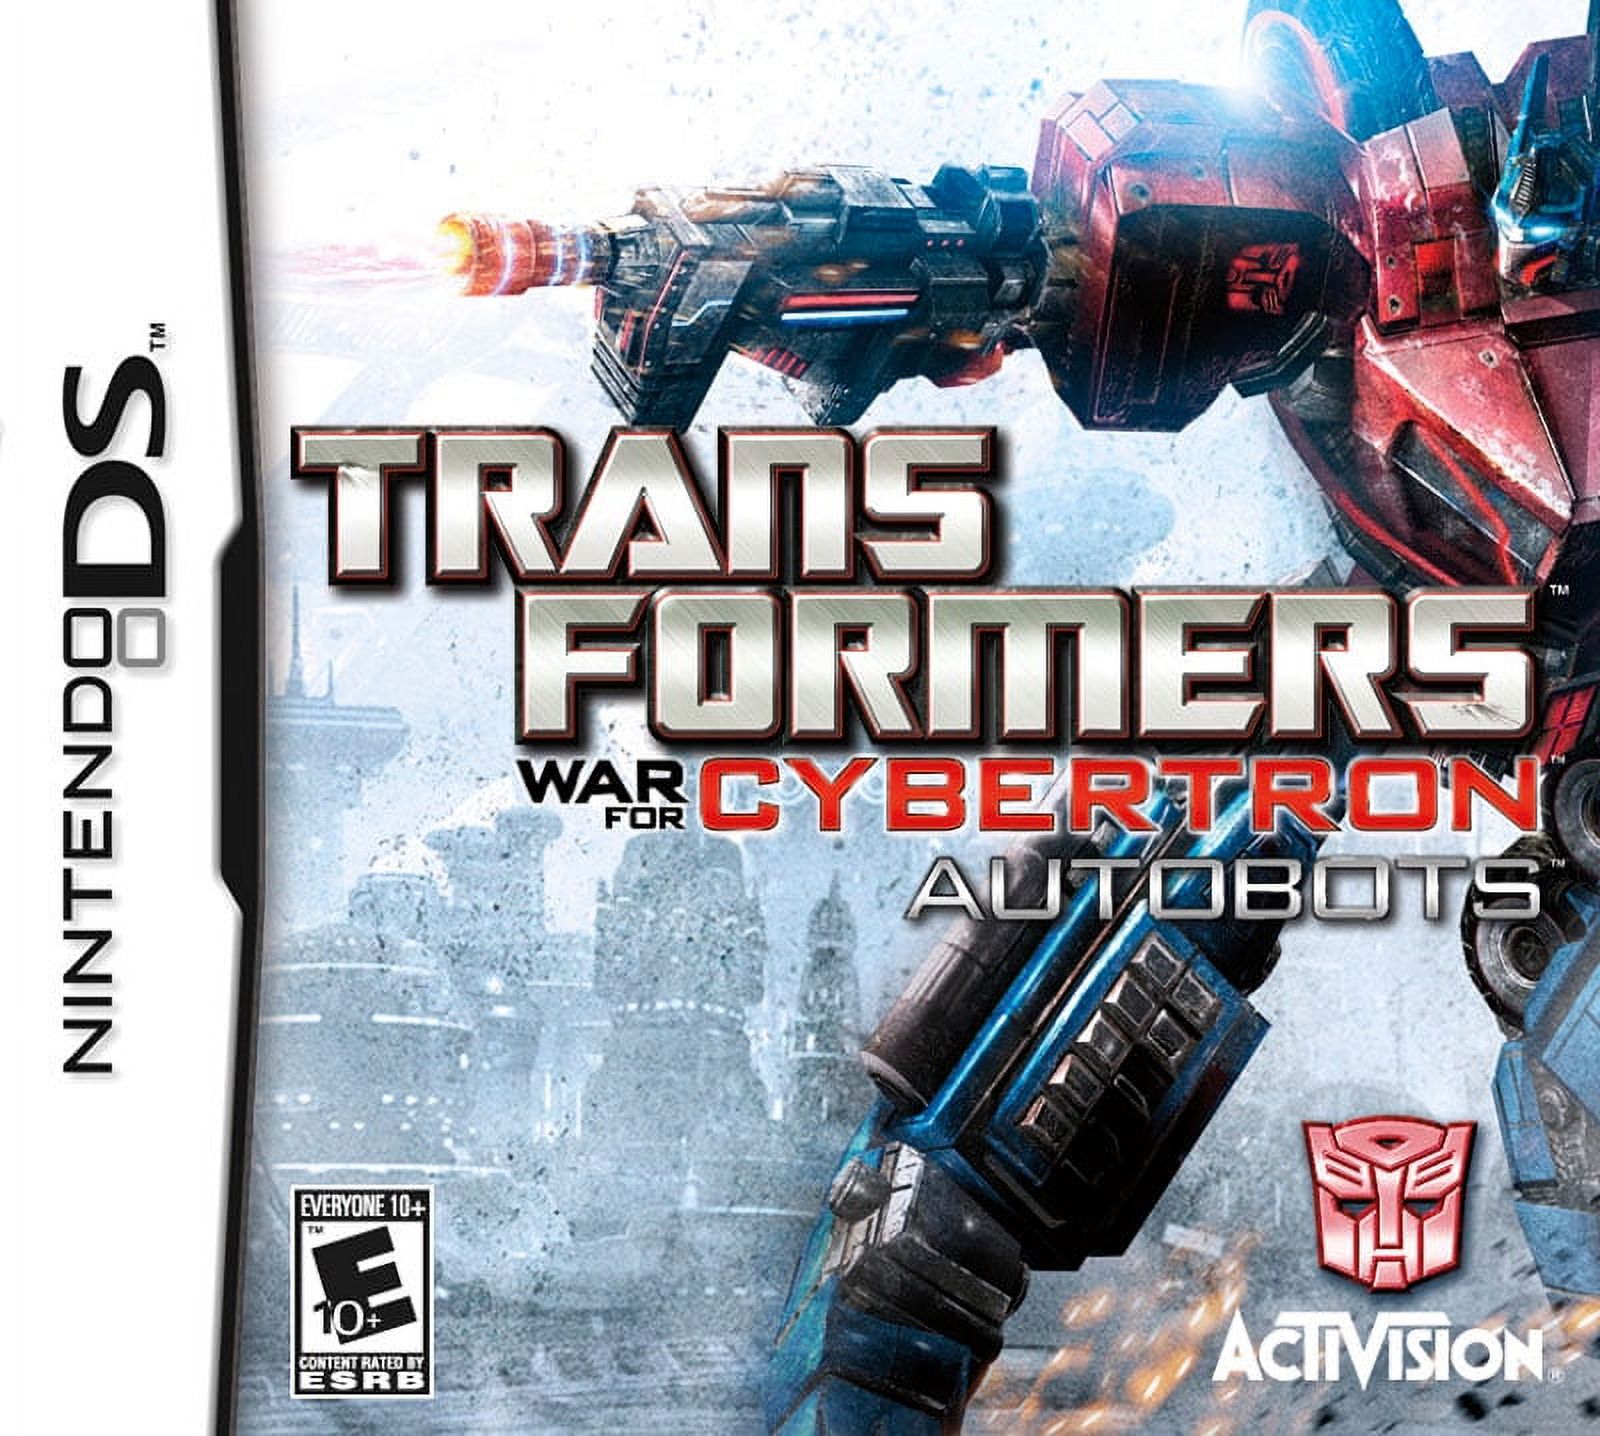 Transformers War for Cybertron: Autobots - Nintendo DS - image 1 of 6